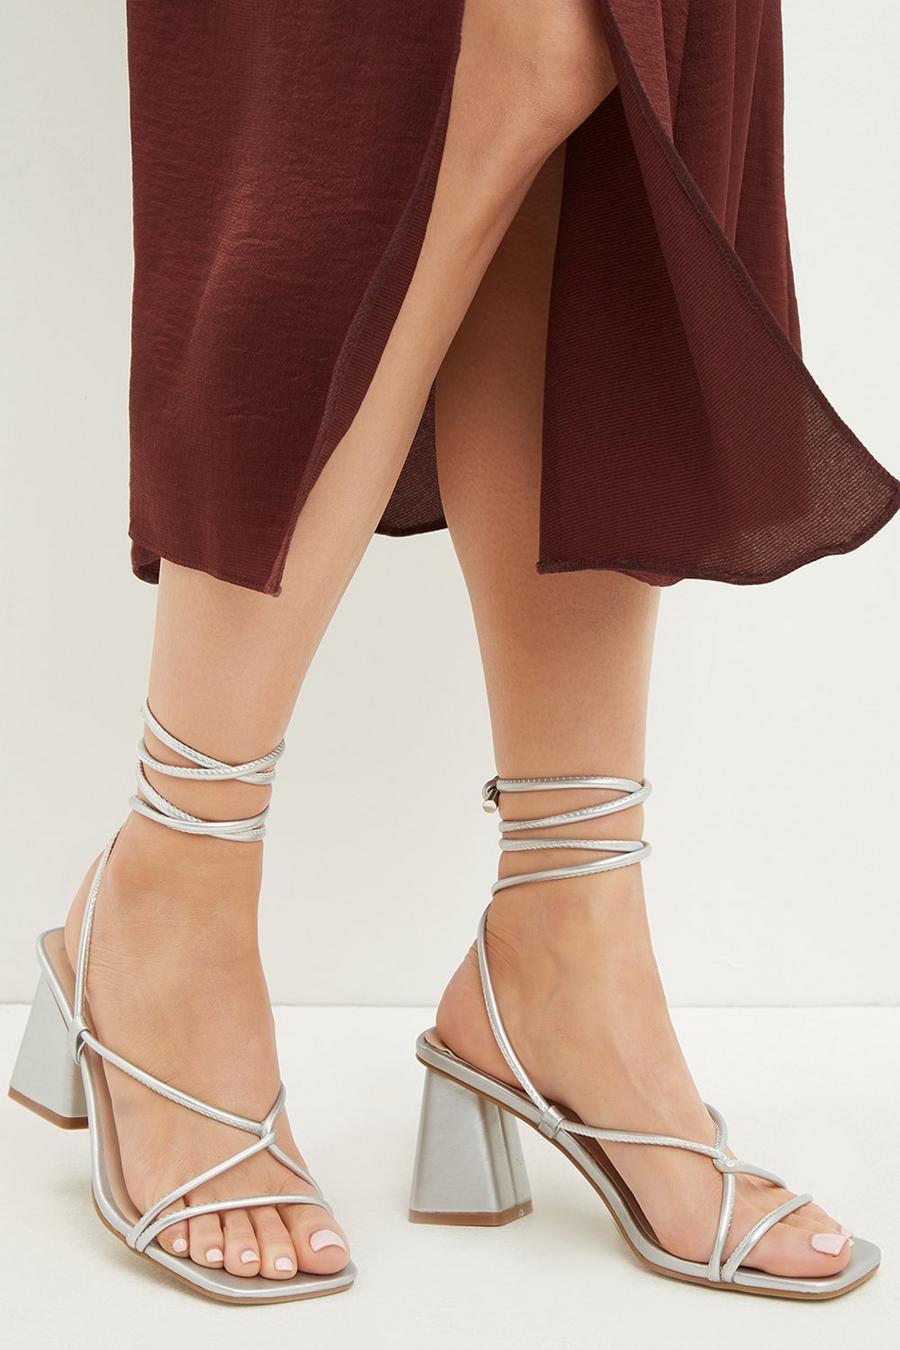 Sully Ankle Tie Flared Heel Sandal